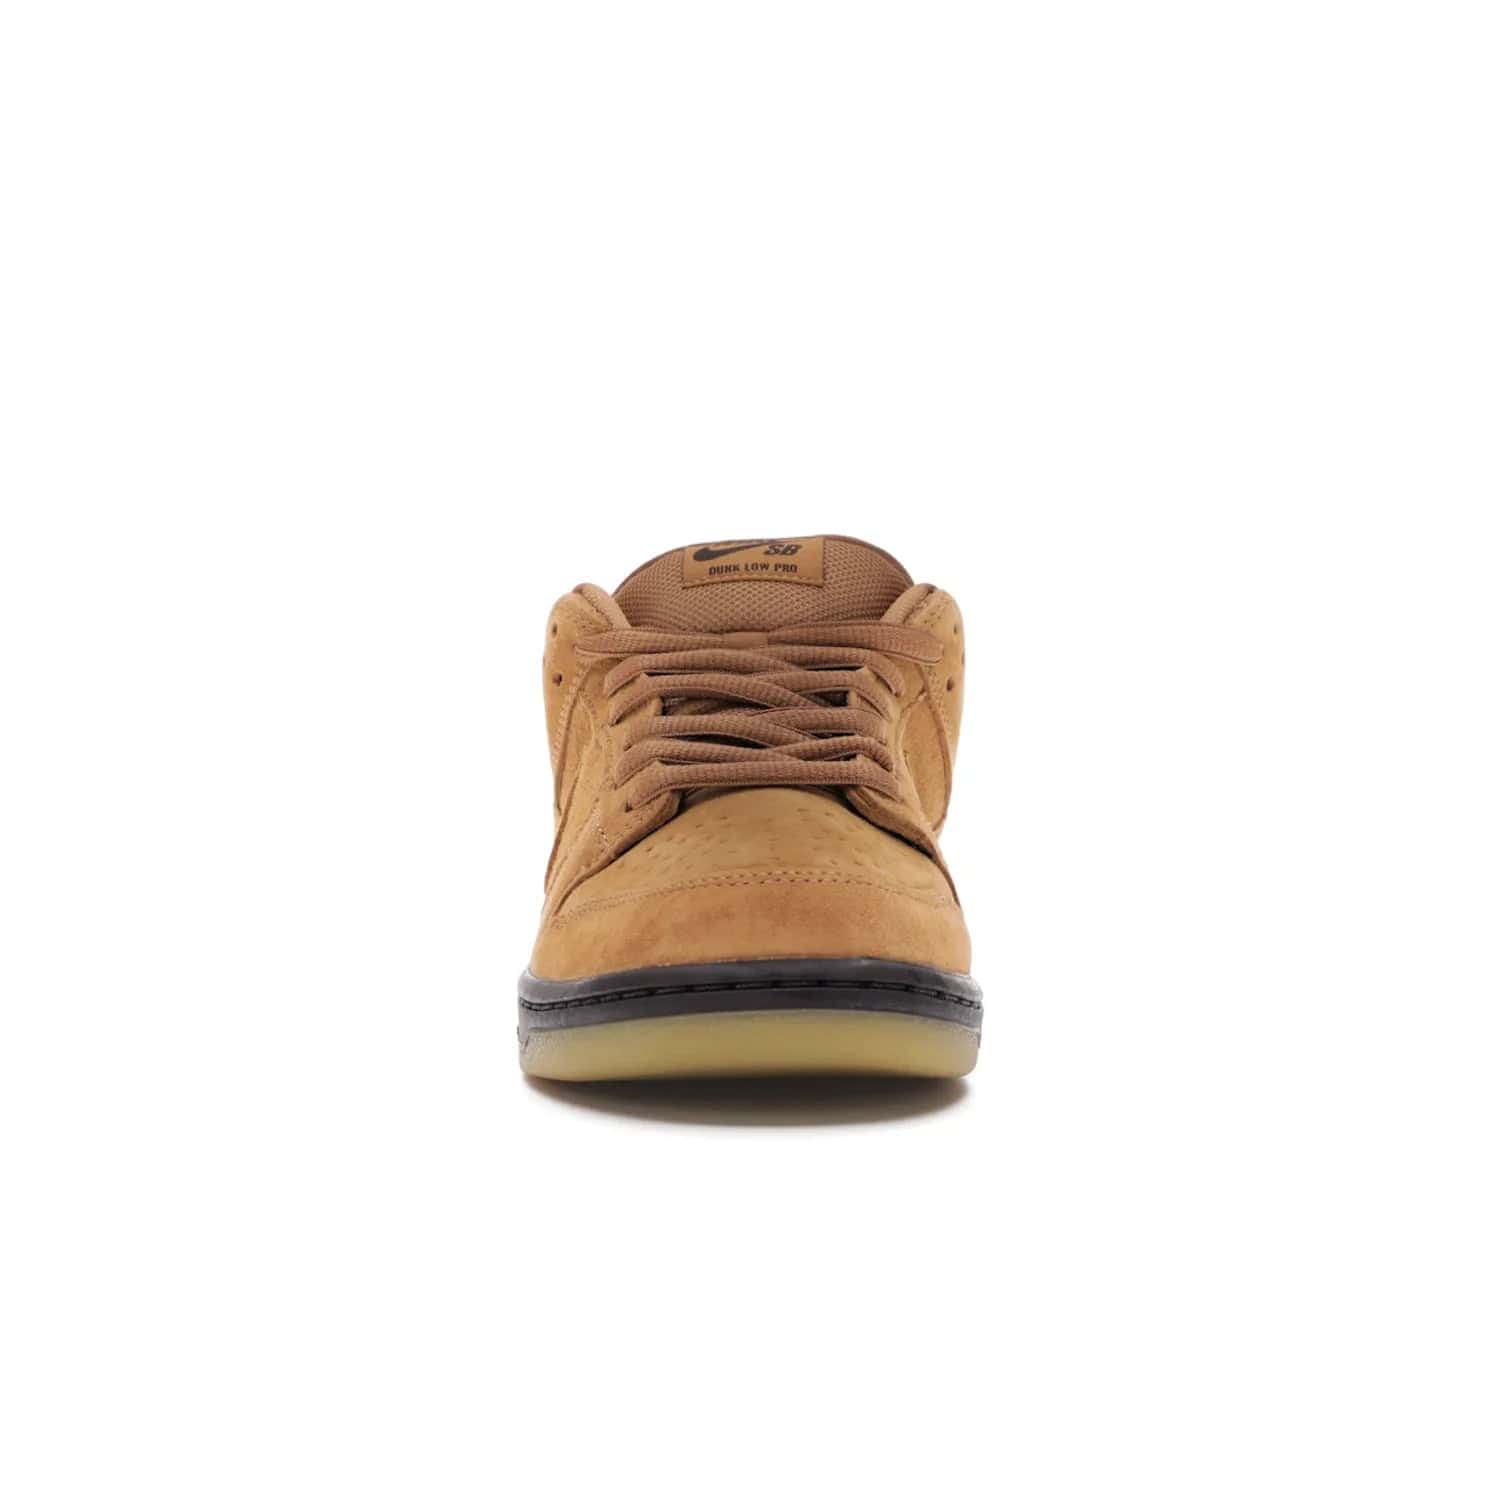 Nike SB Dunk Low Wheat (2021/2023) - Image 10 - Only at www.BallersClubKickz.com - The Nike SB Dunk Low Wheat (2021/2023)has a sleek silhouette and wheat suede upper. Tan tones for lining, mesh tongues, and laces. Iconic color palette midsole, perforated boxing toe. Brown branding on tongue and heel. Gum rubber outsole with partitioned pattern for traction. Eschewed in Feb 2021 for $110.